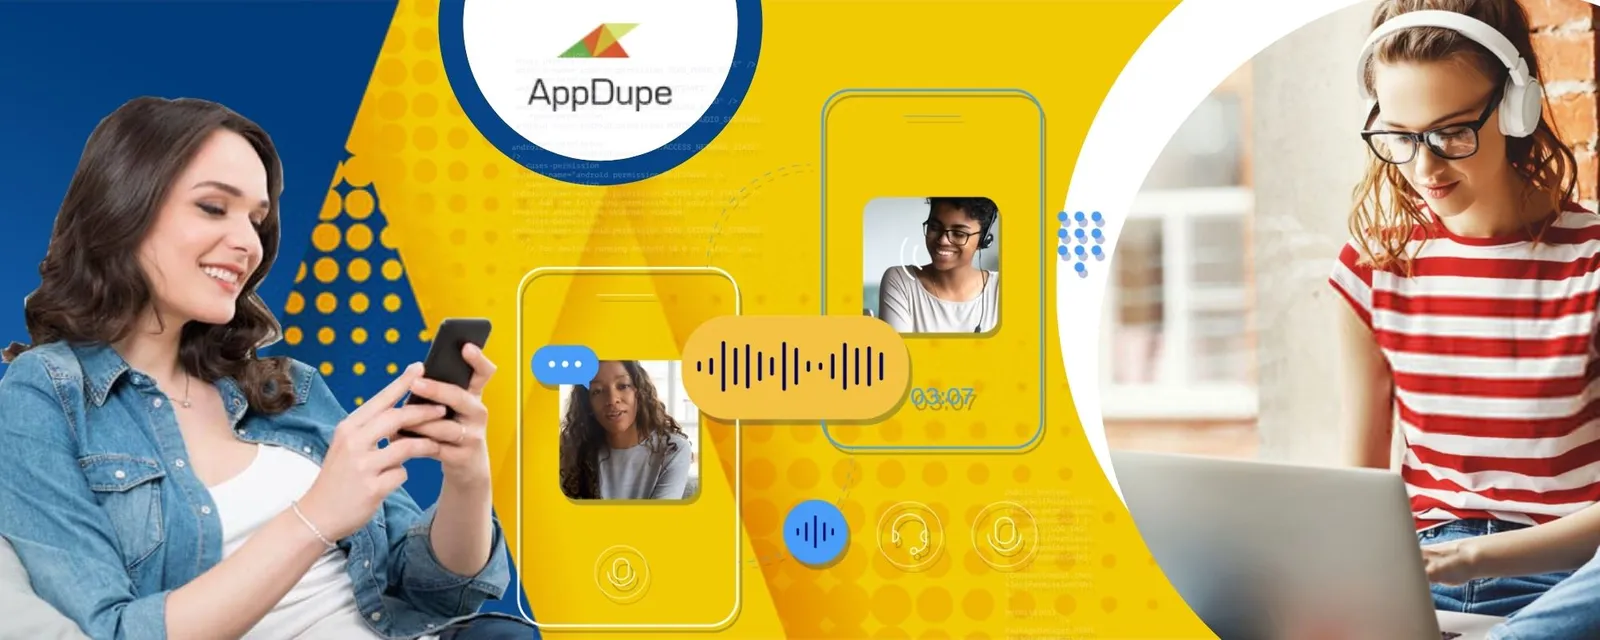 Launch An Attractive Chatting Solutions By Building Up An Awesome App Like Stereo